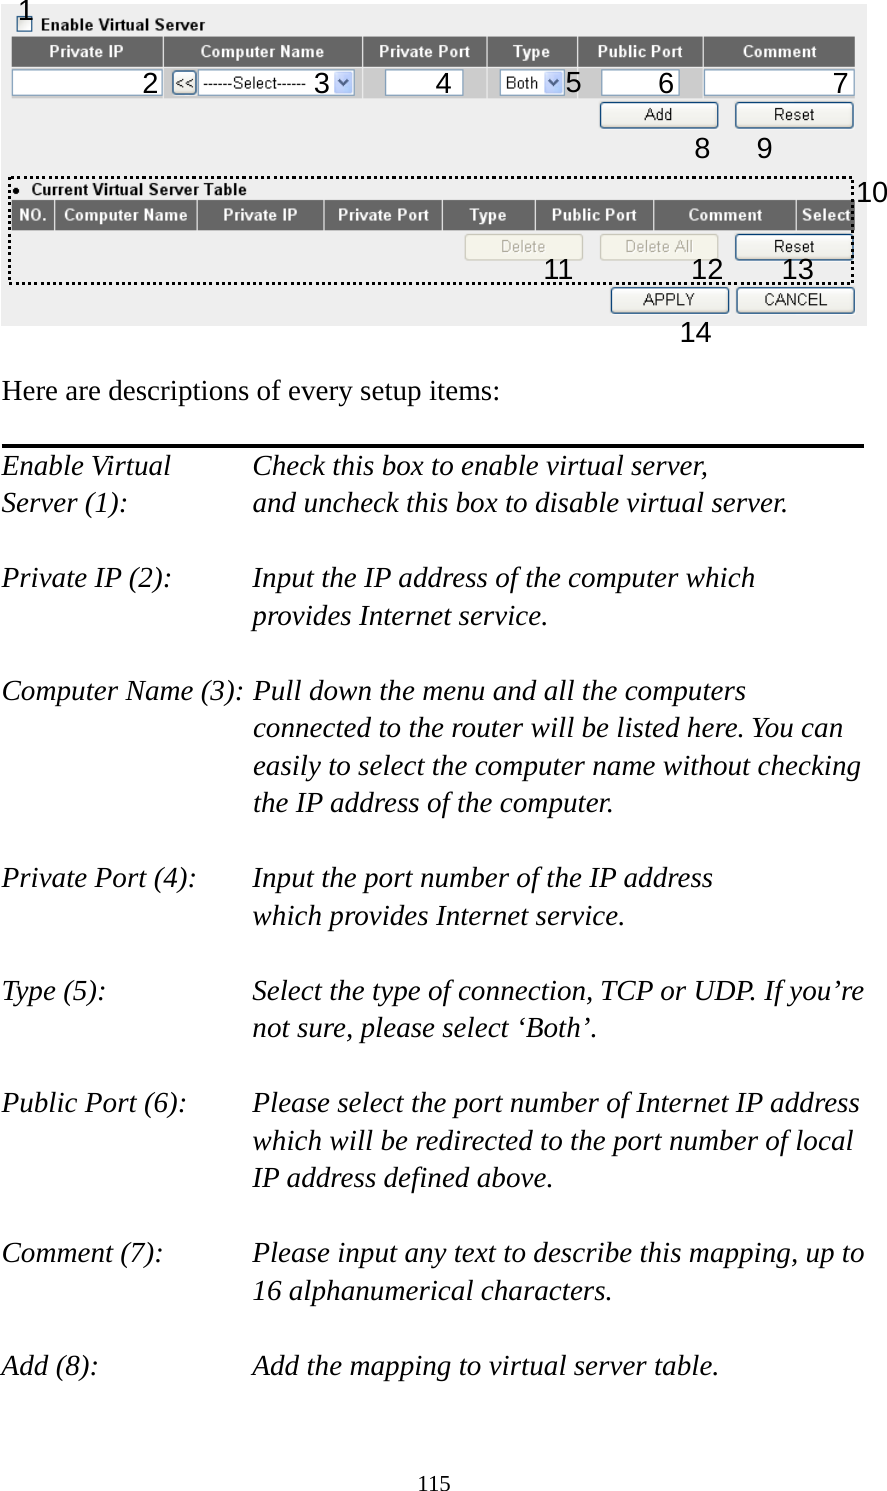 115   Here are descriptions of every setup items:  Enable Virtual      Check this box to enable virtual server, Server (1):       and uncheck this box to disable virtual server.  Private IP (2):      Input the IP address of the computer which      provides Internet service.  Computer Name (3): Pull down the menu and all the computers connected to the router will be listed here. You can easily to select the computer name without checking the IP address of the computer.  Private Port (4):    Input the port number of the IP address      which provides Internet service.  Type (5):    Select the type of connection, TCP or UDP. If you’re not sure, please select ‘Both’.  Public Port (6):    Please select the port number of Internet IP address which will be redirected to the port number of local IP address defined above.  Comment (7):    Please input any text to describe this mapping, up to 16 alphanumerical characters.  Add (8):        Add the mapping to virtual server table.  1 2 3 4 5 8 9 10 11 12 13 14 7 6 